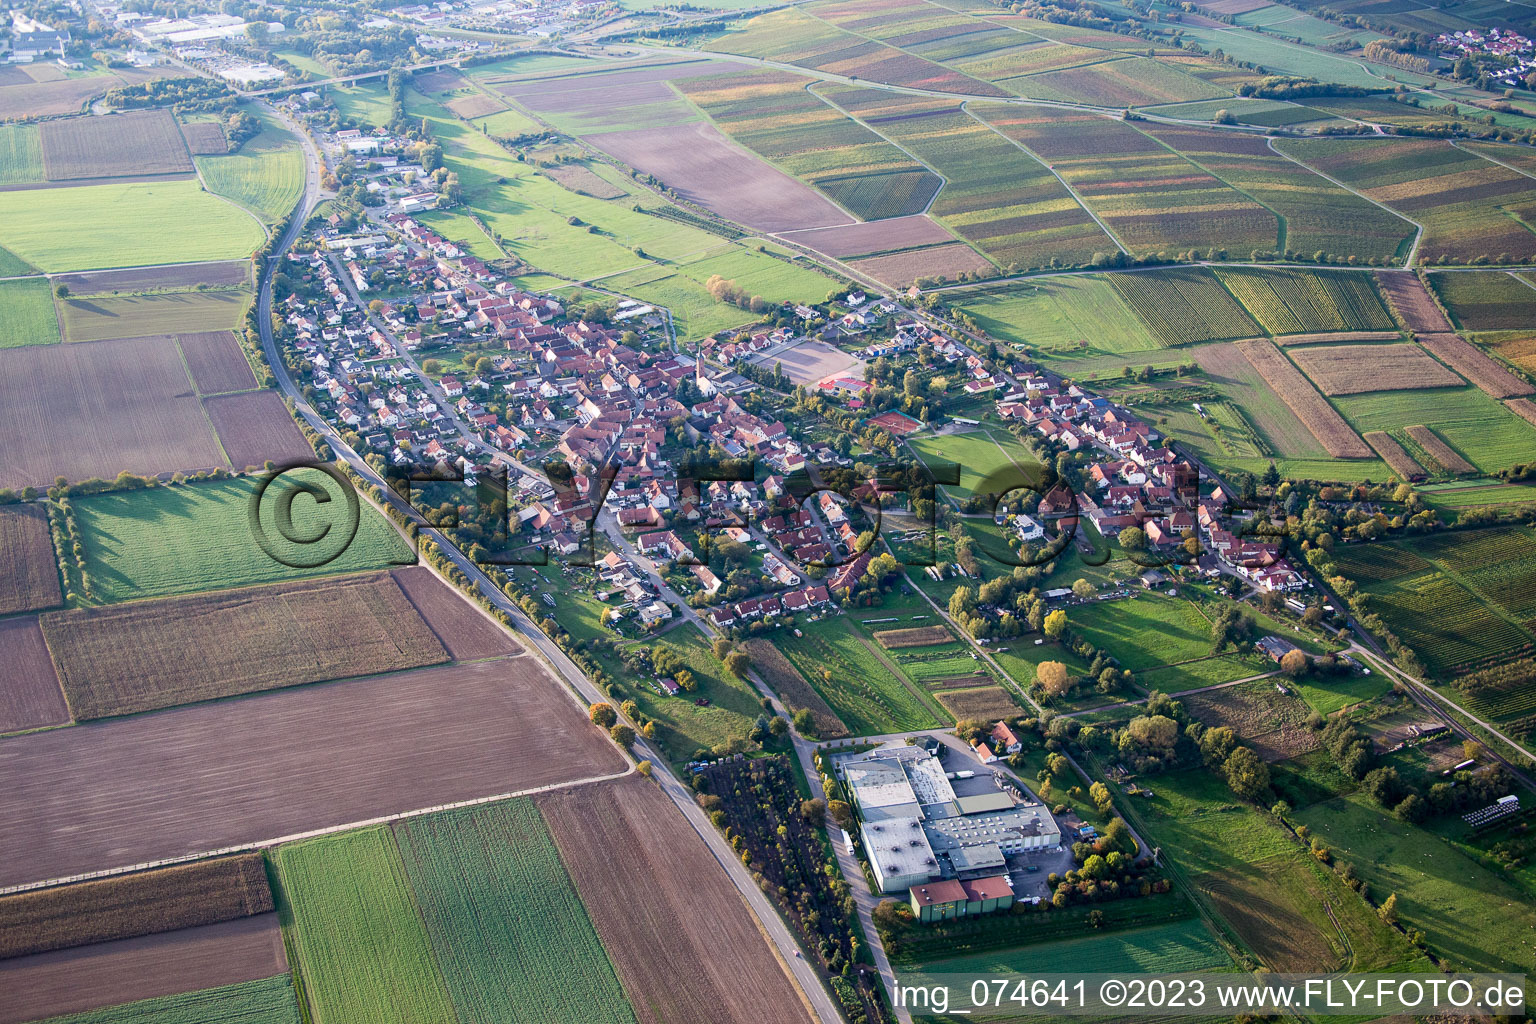 Aerial view of District Kapellen in Kapellen-Drusweiler in the state Rhineland-Palatinate, Germany